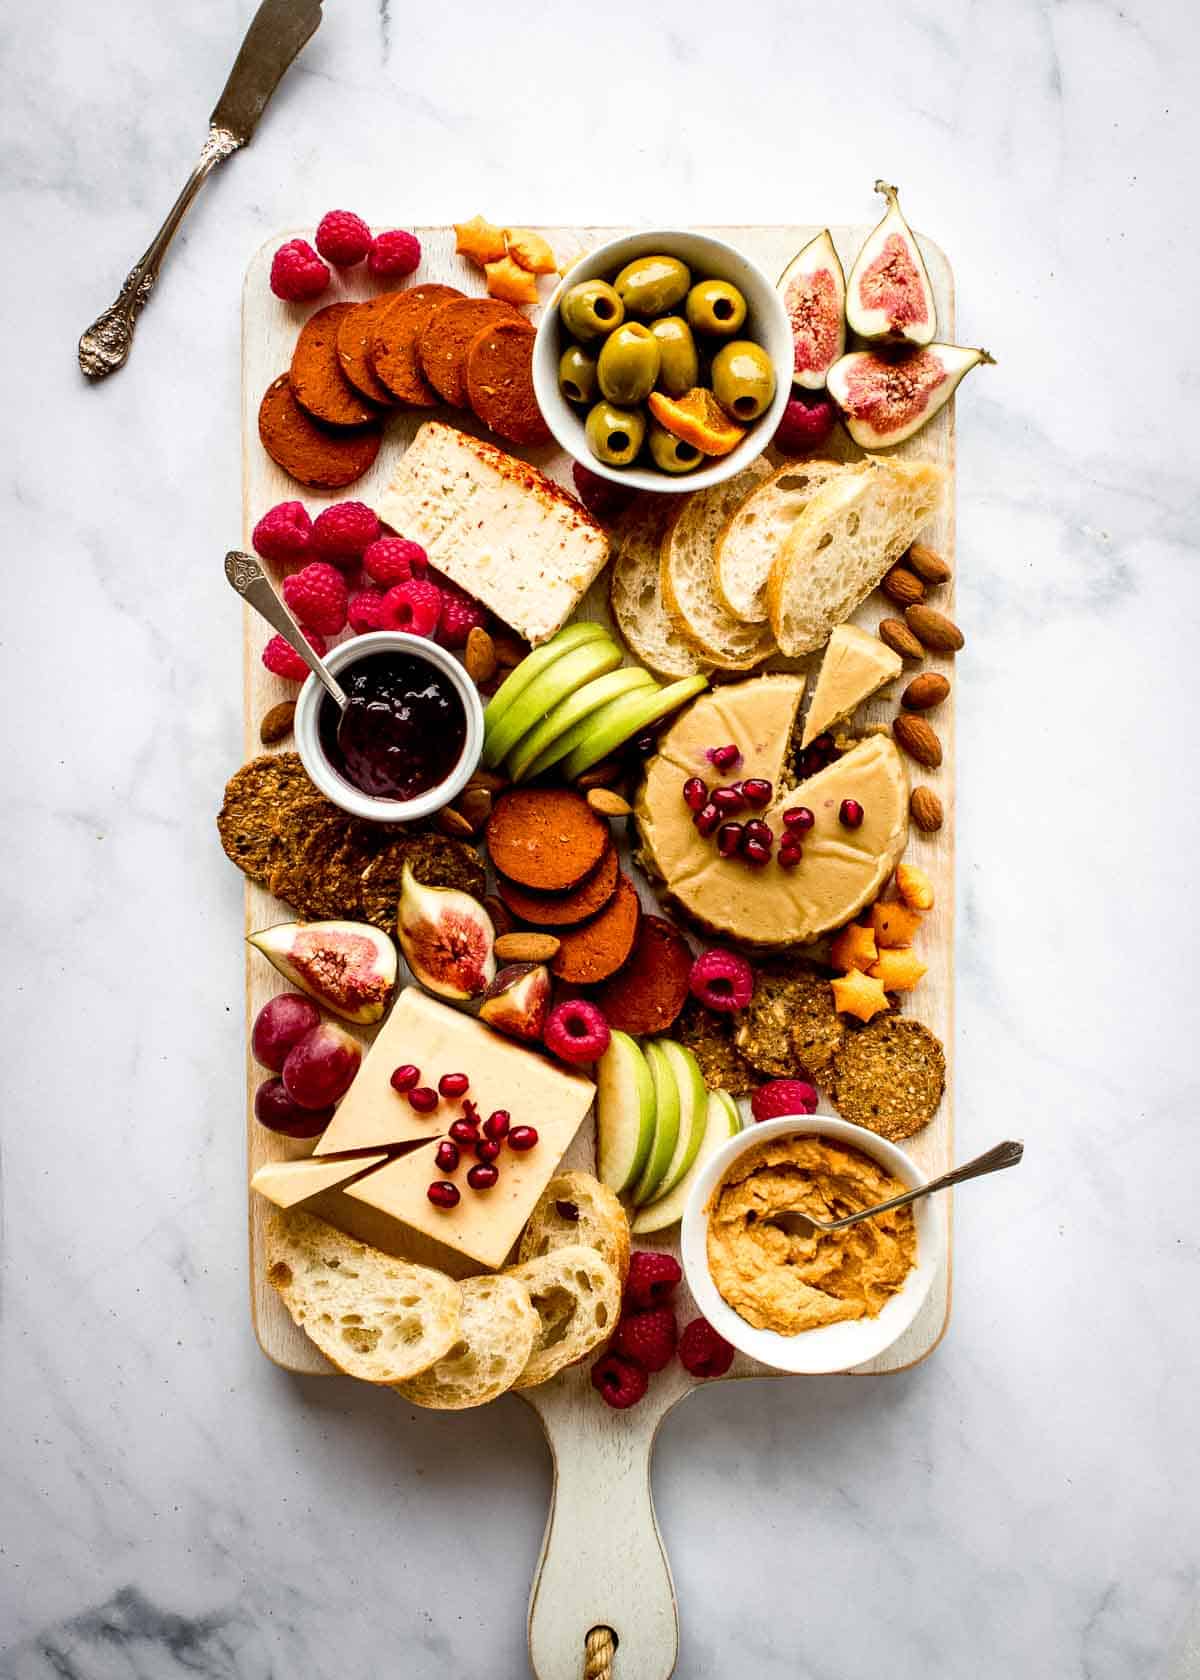 A rectangular vegetarian charcuterie board, featuring vegan cheese, plant-based meats, fruits, bread and crackers.